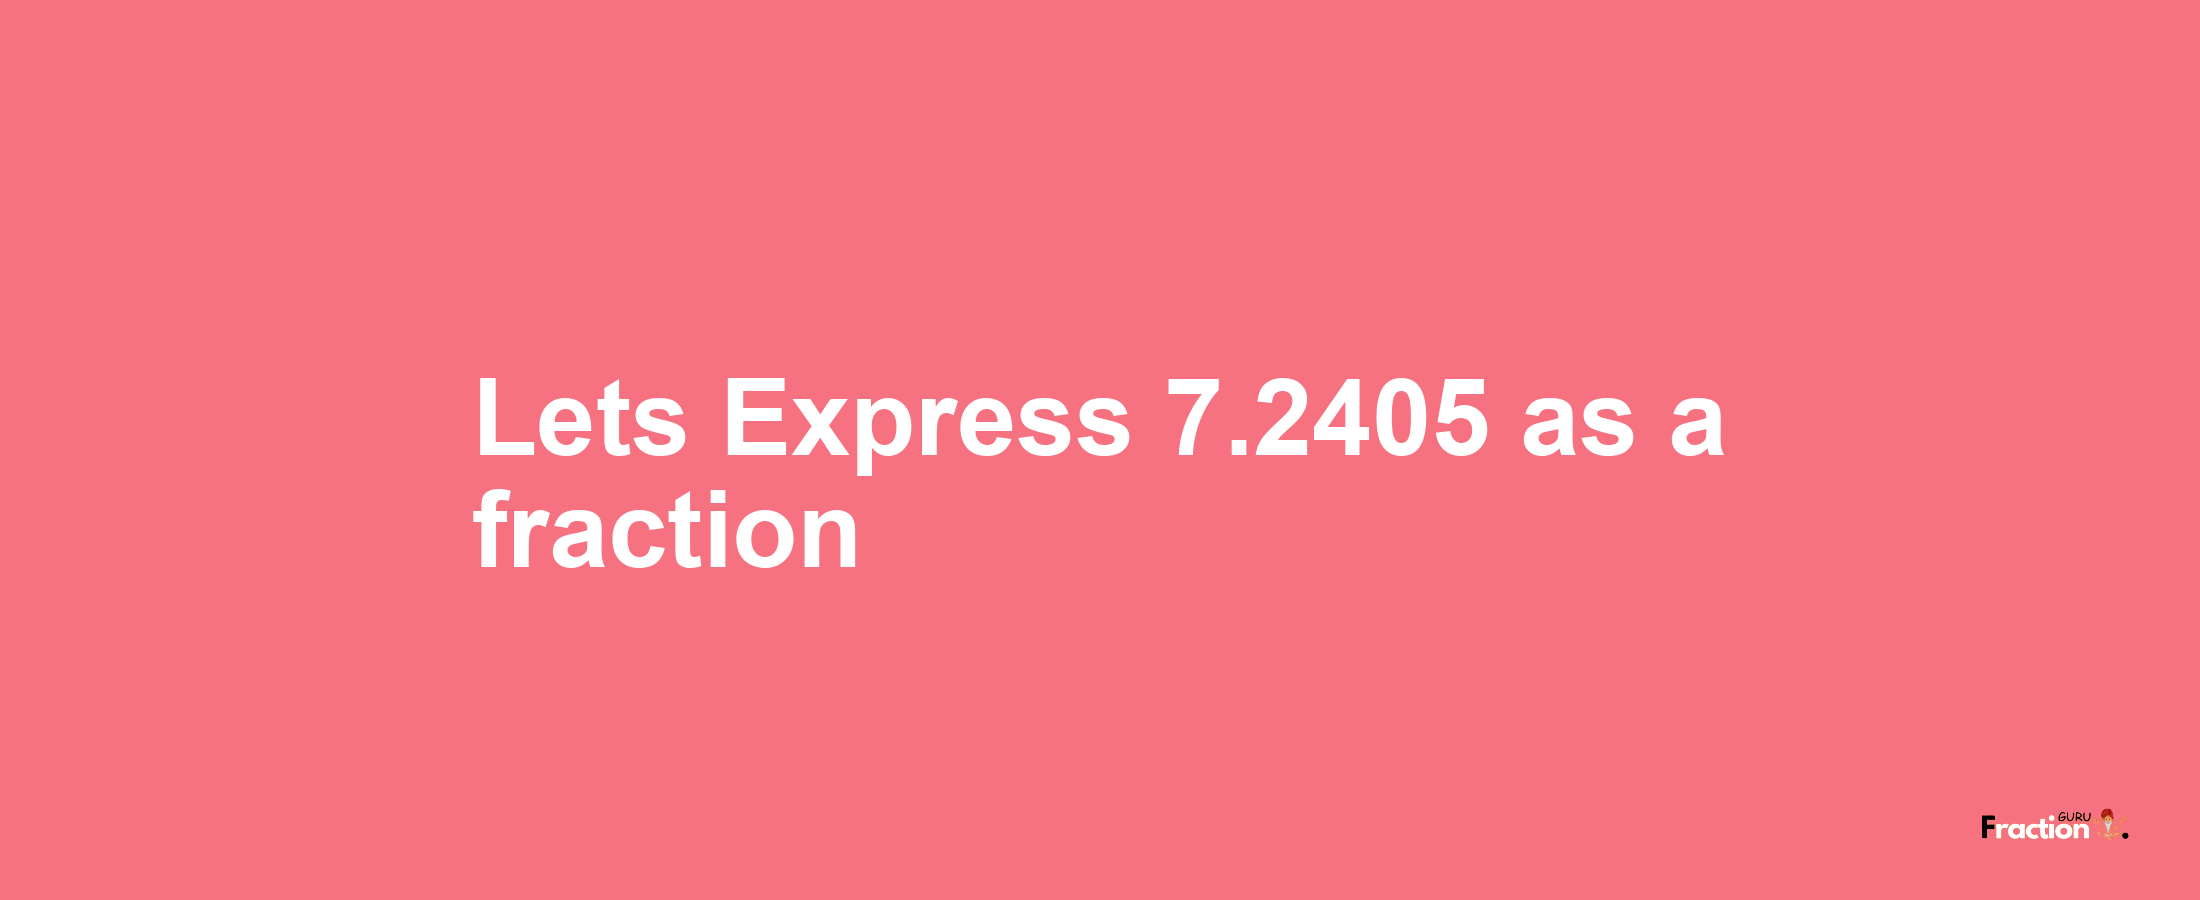 Lets Express 7.2405 as afraction